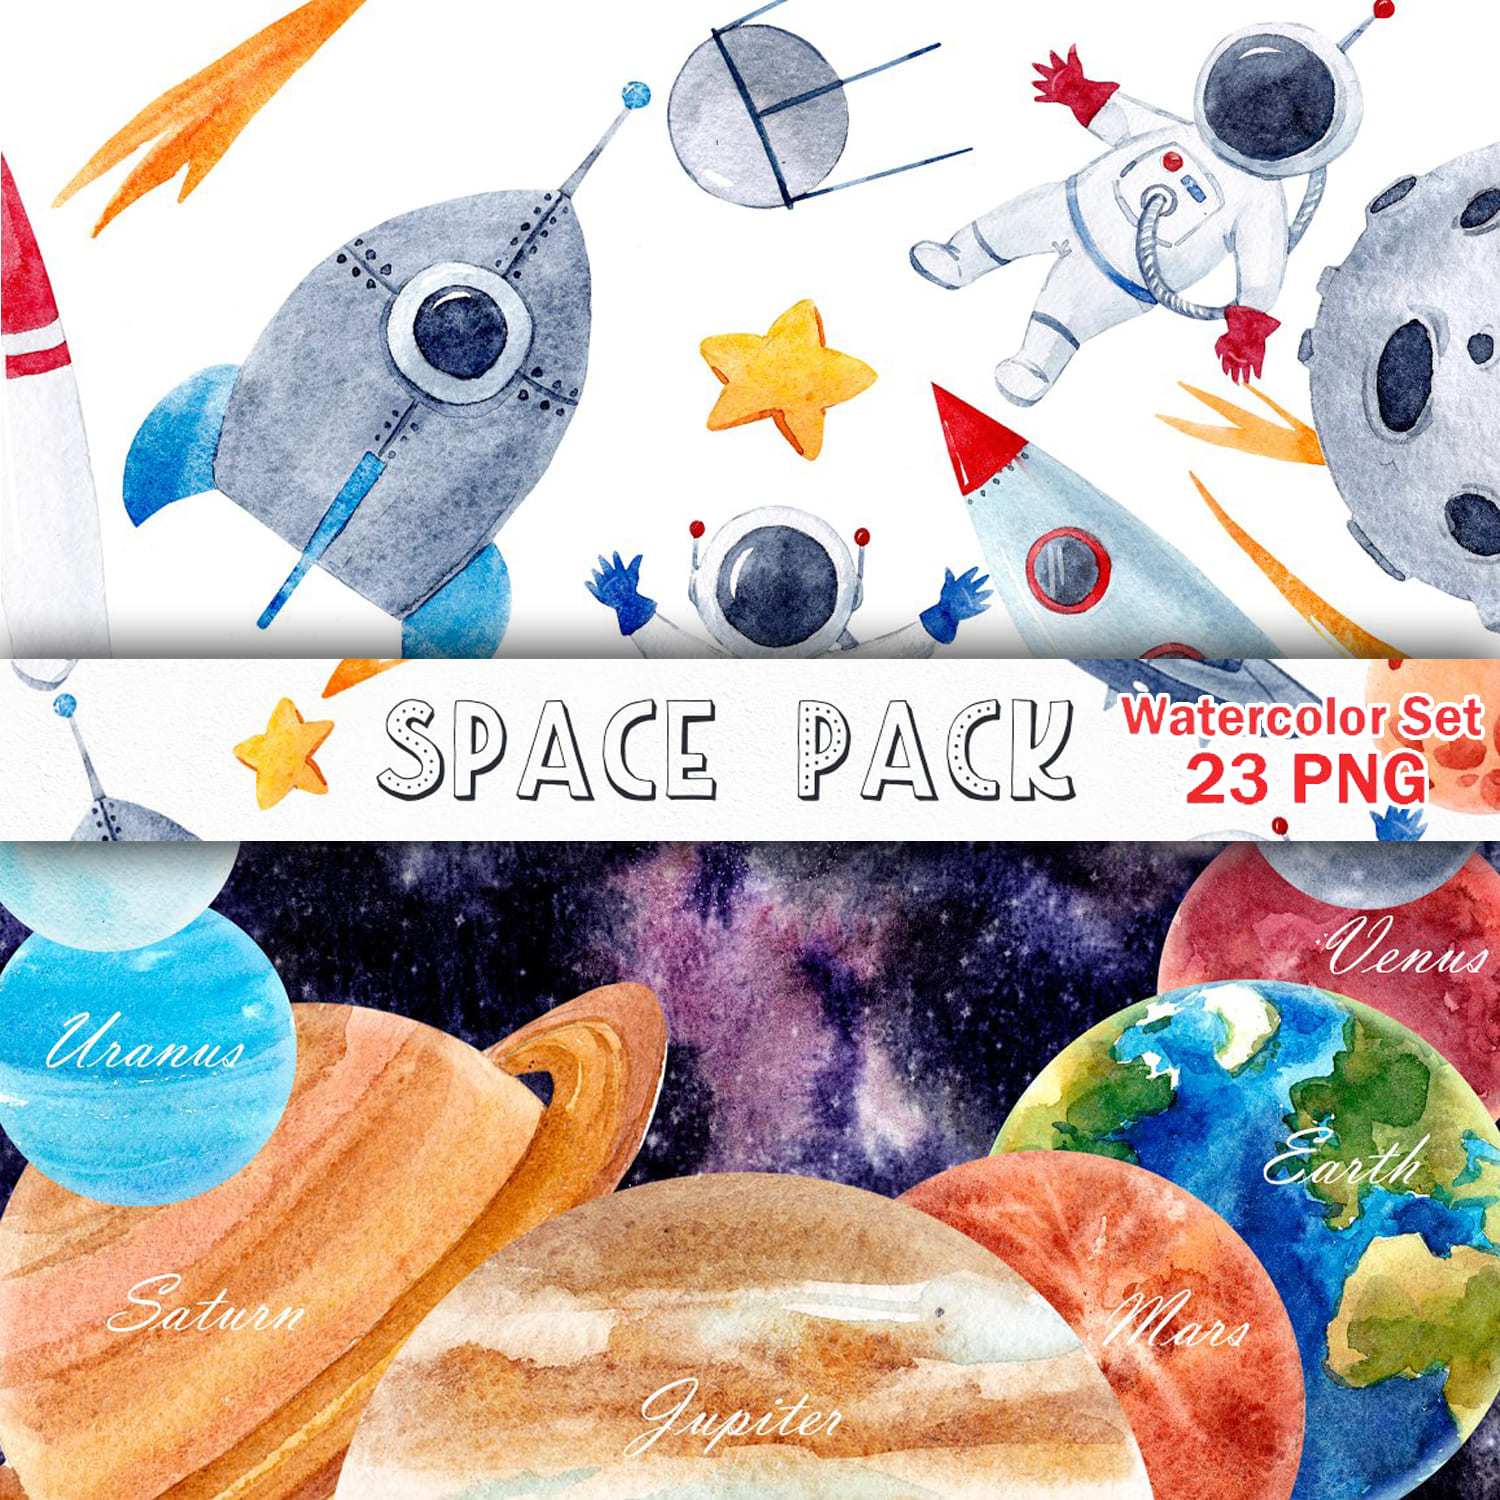 Watercolor Space Pack PNG cover image.